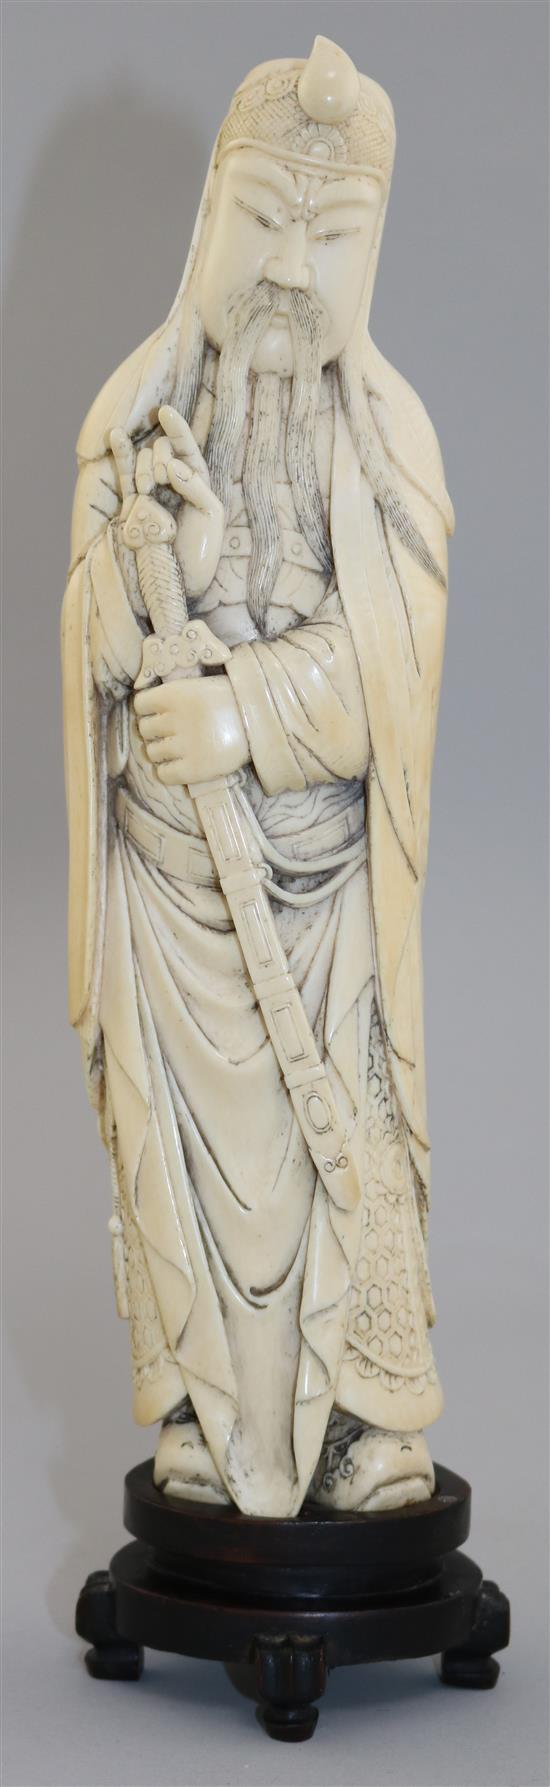 A Chinese ivory tusk figure of Lu Dongbin, late 19th / early 20th century, total height 30.5cm